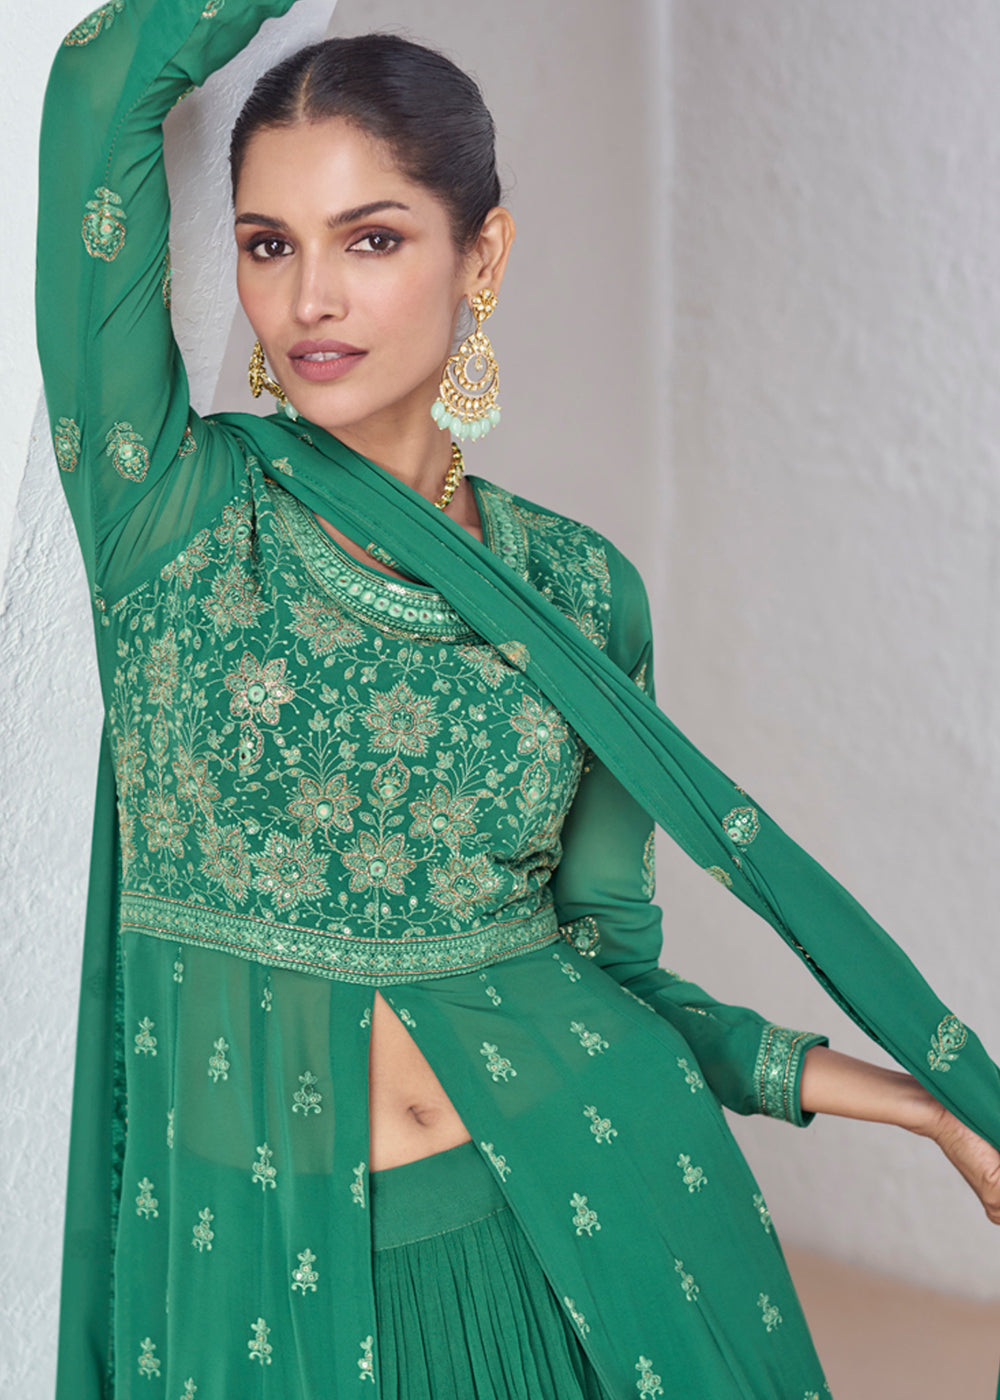 Buy Now Green Front Slit Embroidered Lehenga Skirt Suit Online in USA, UK, Canada, Germany, Australia & Worldwide at Empress Clothing. 